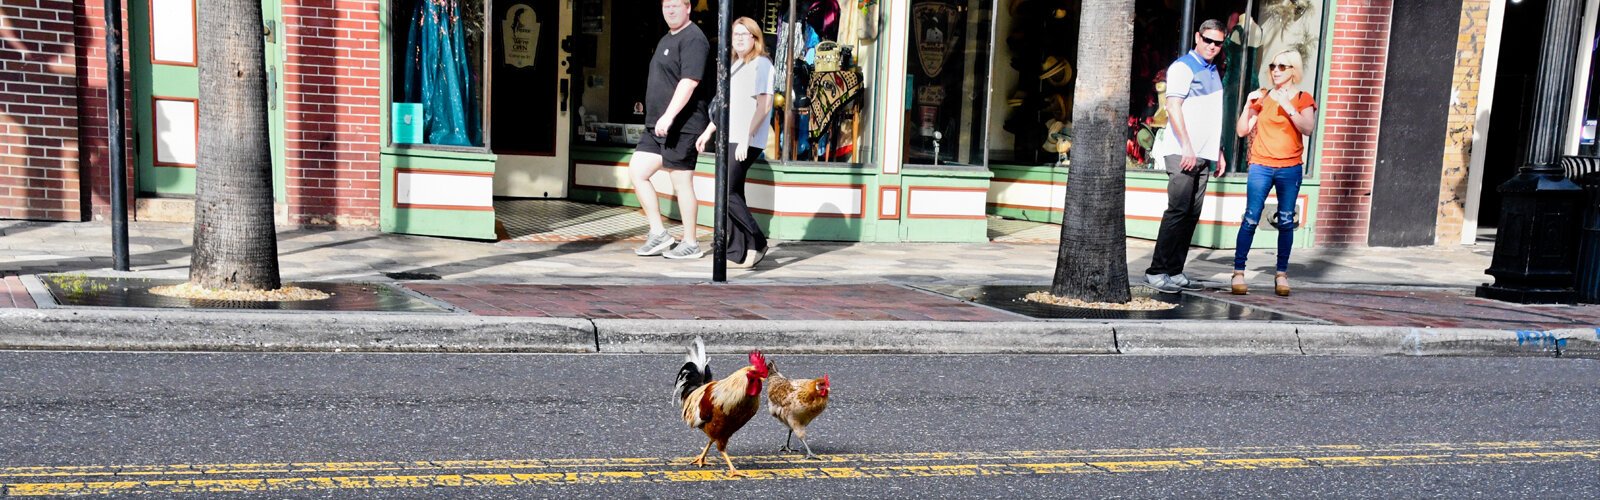 A permanent fixture of Ybor City, a pair of determined roosters crossing the street in perfect synchrony brings marveling stares from nearby onlookers.